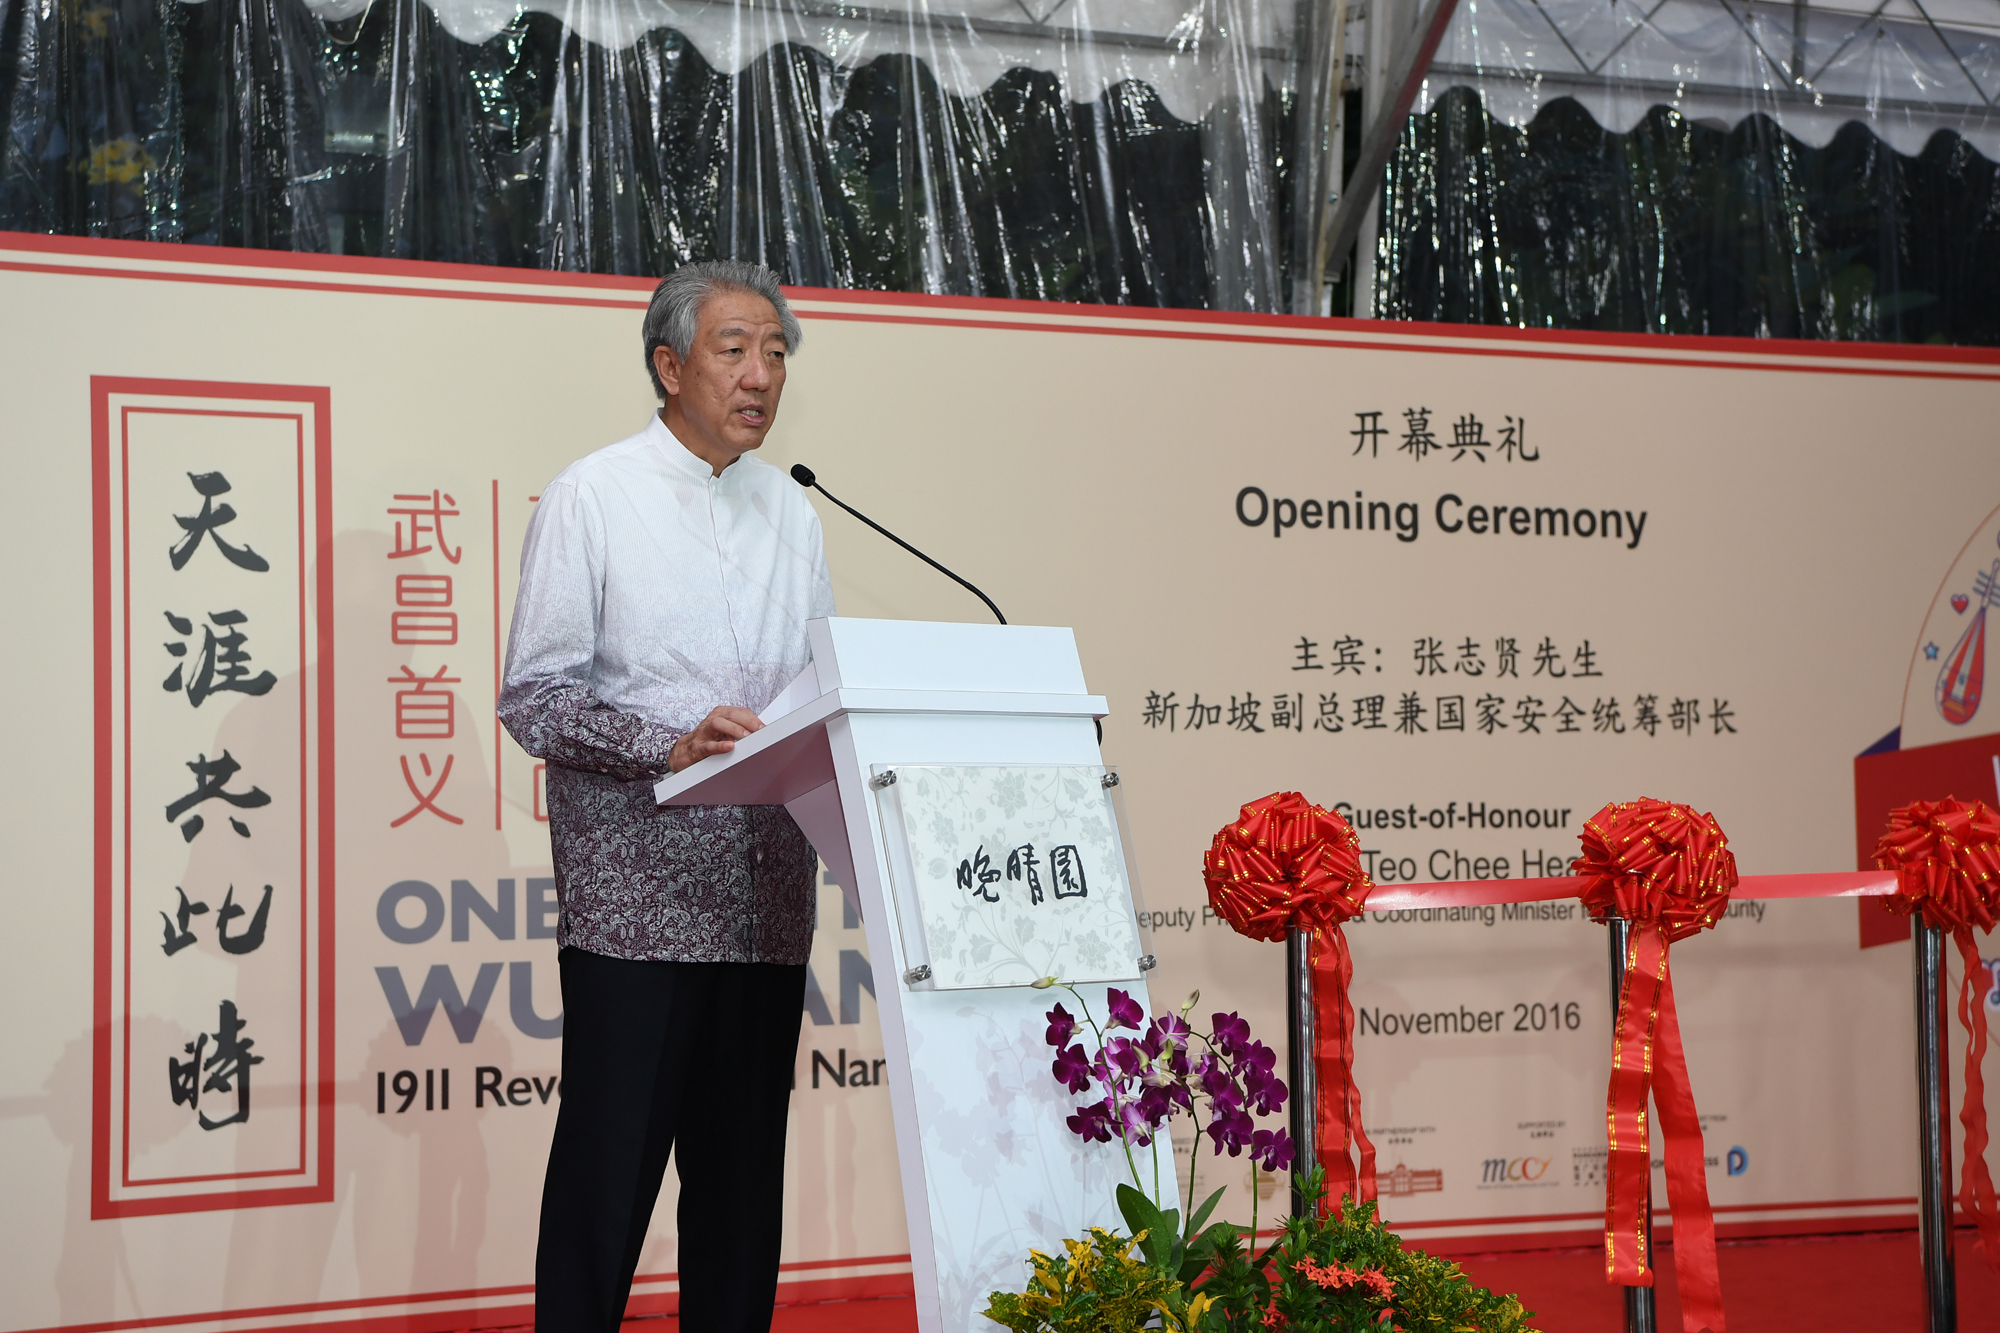 DPM Teo Chee Hean at the Opening of the One Night in Wuchang Exhibition